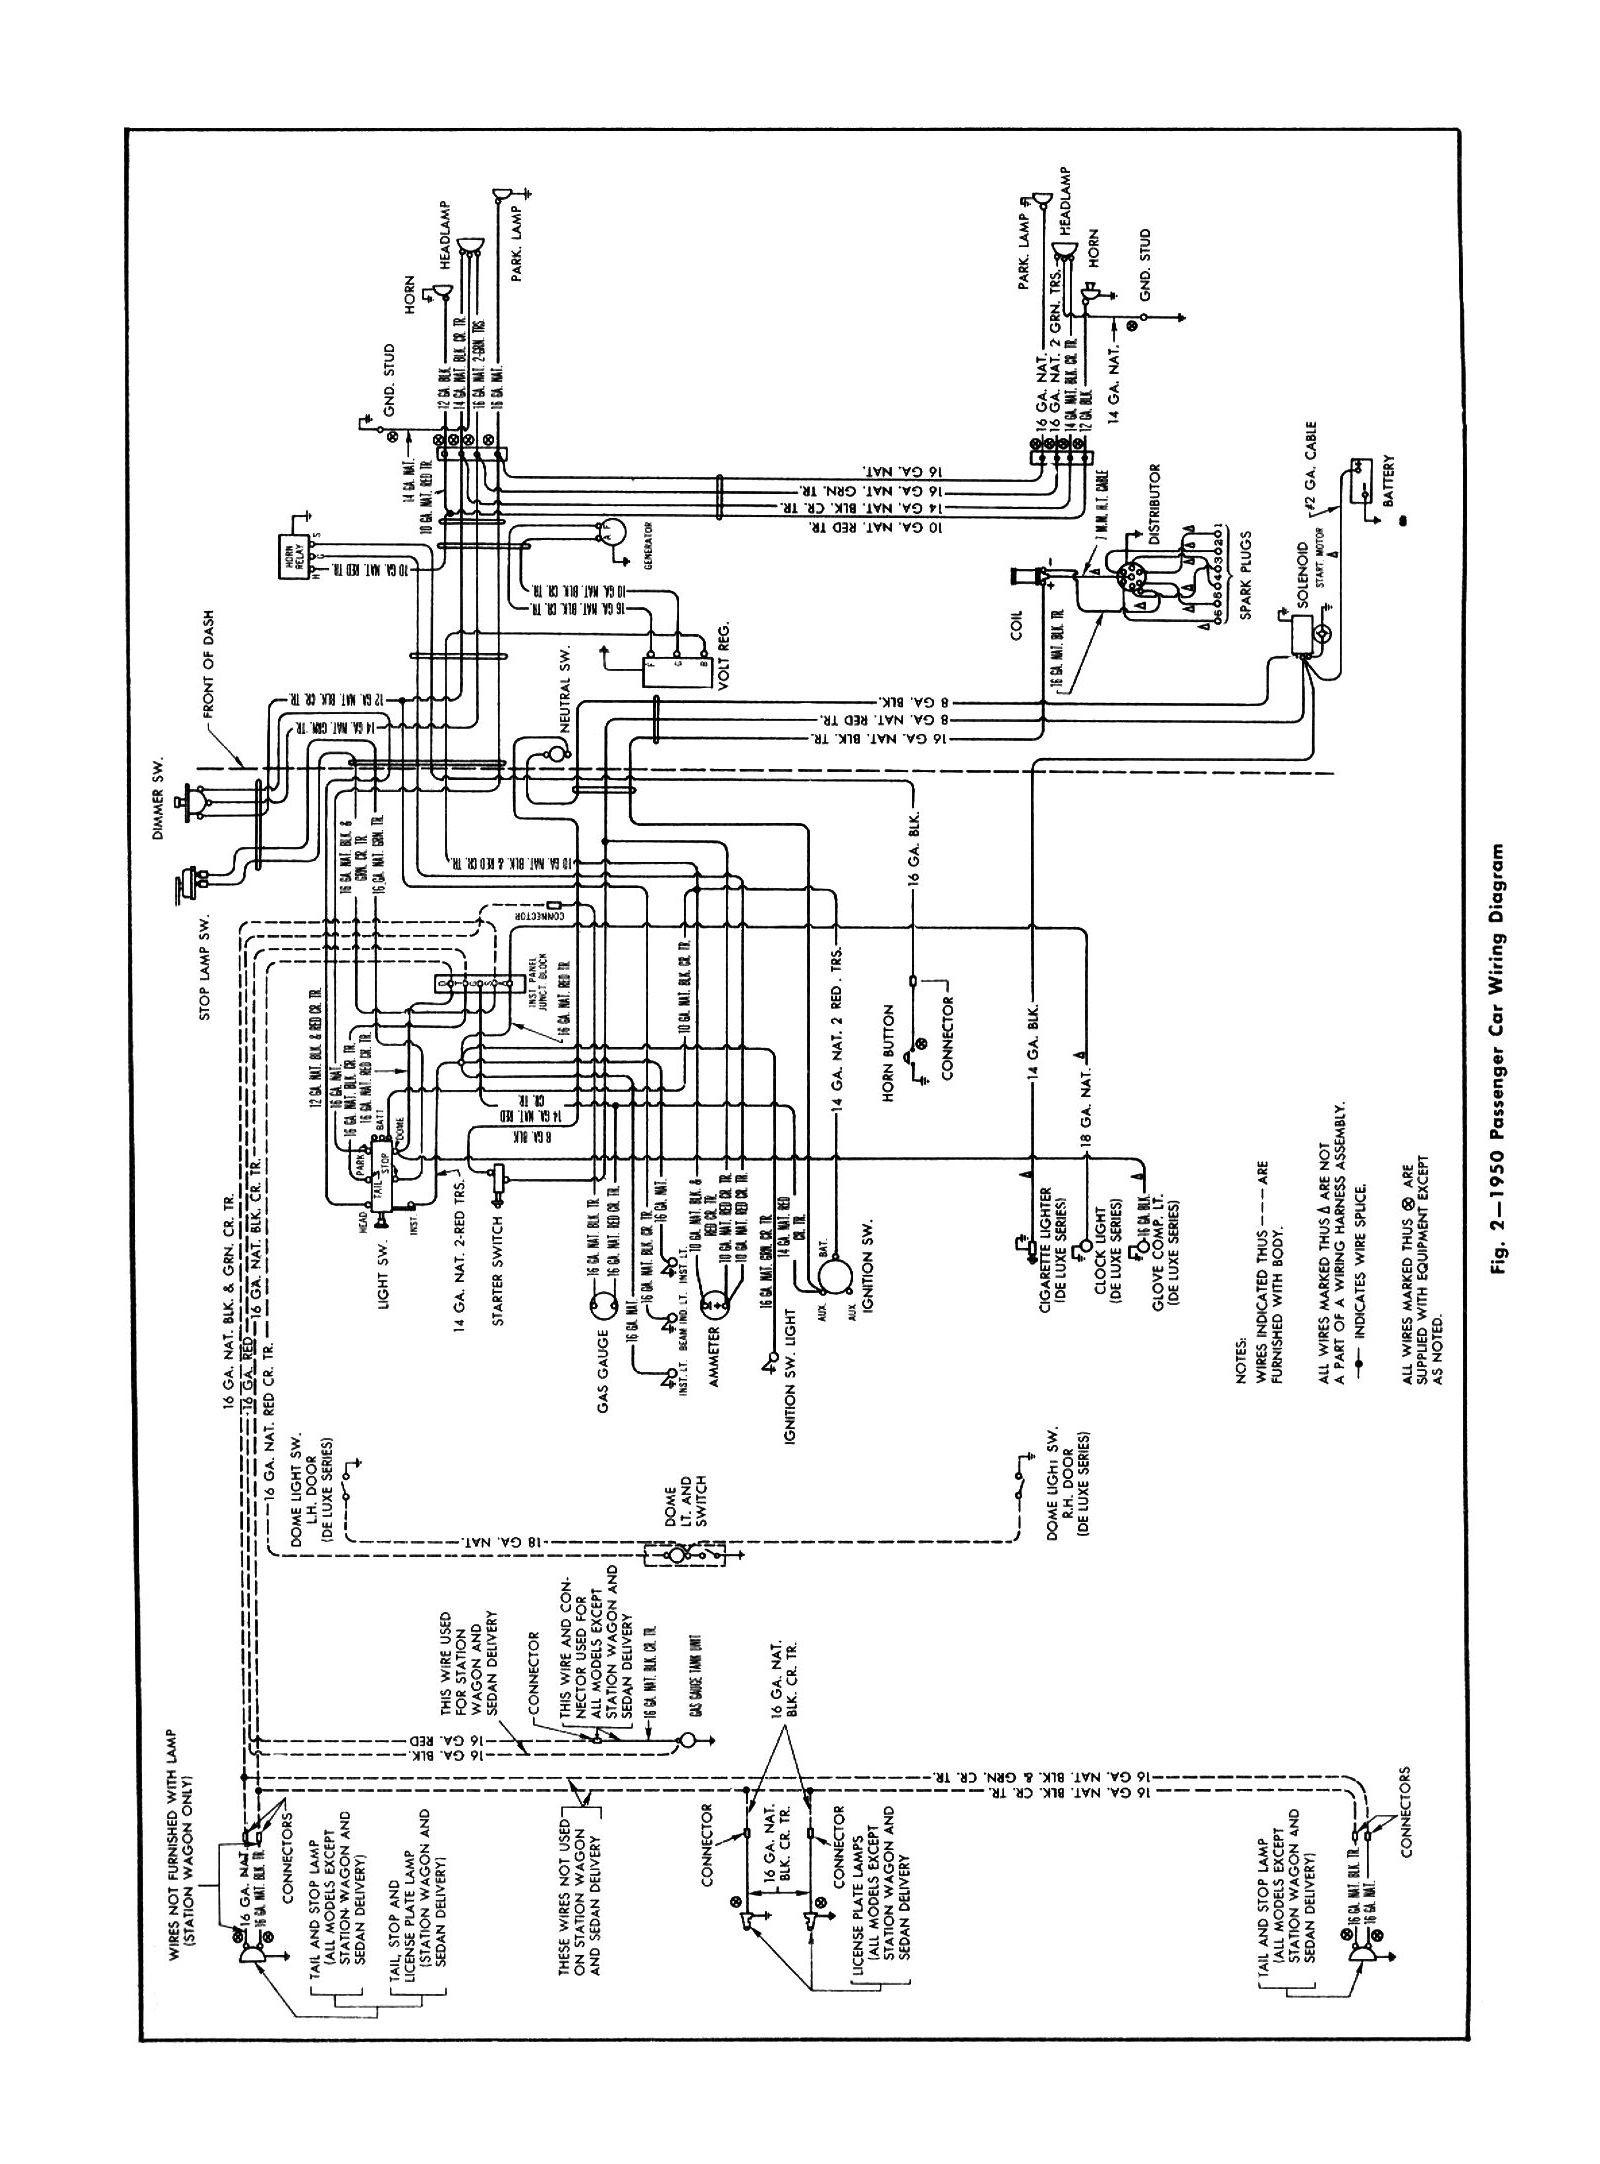 Chevy Wiring Diagrams - Evinrude Wiring Diagram Outboards